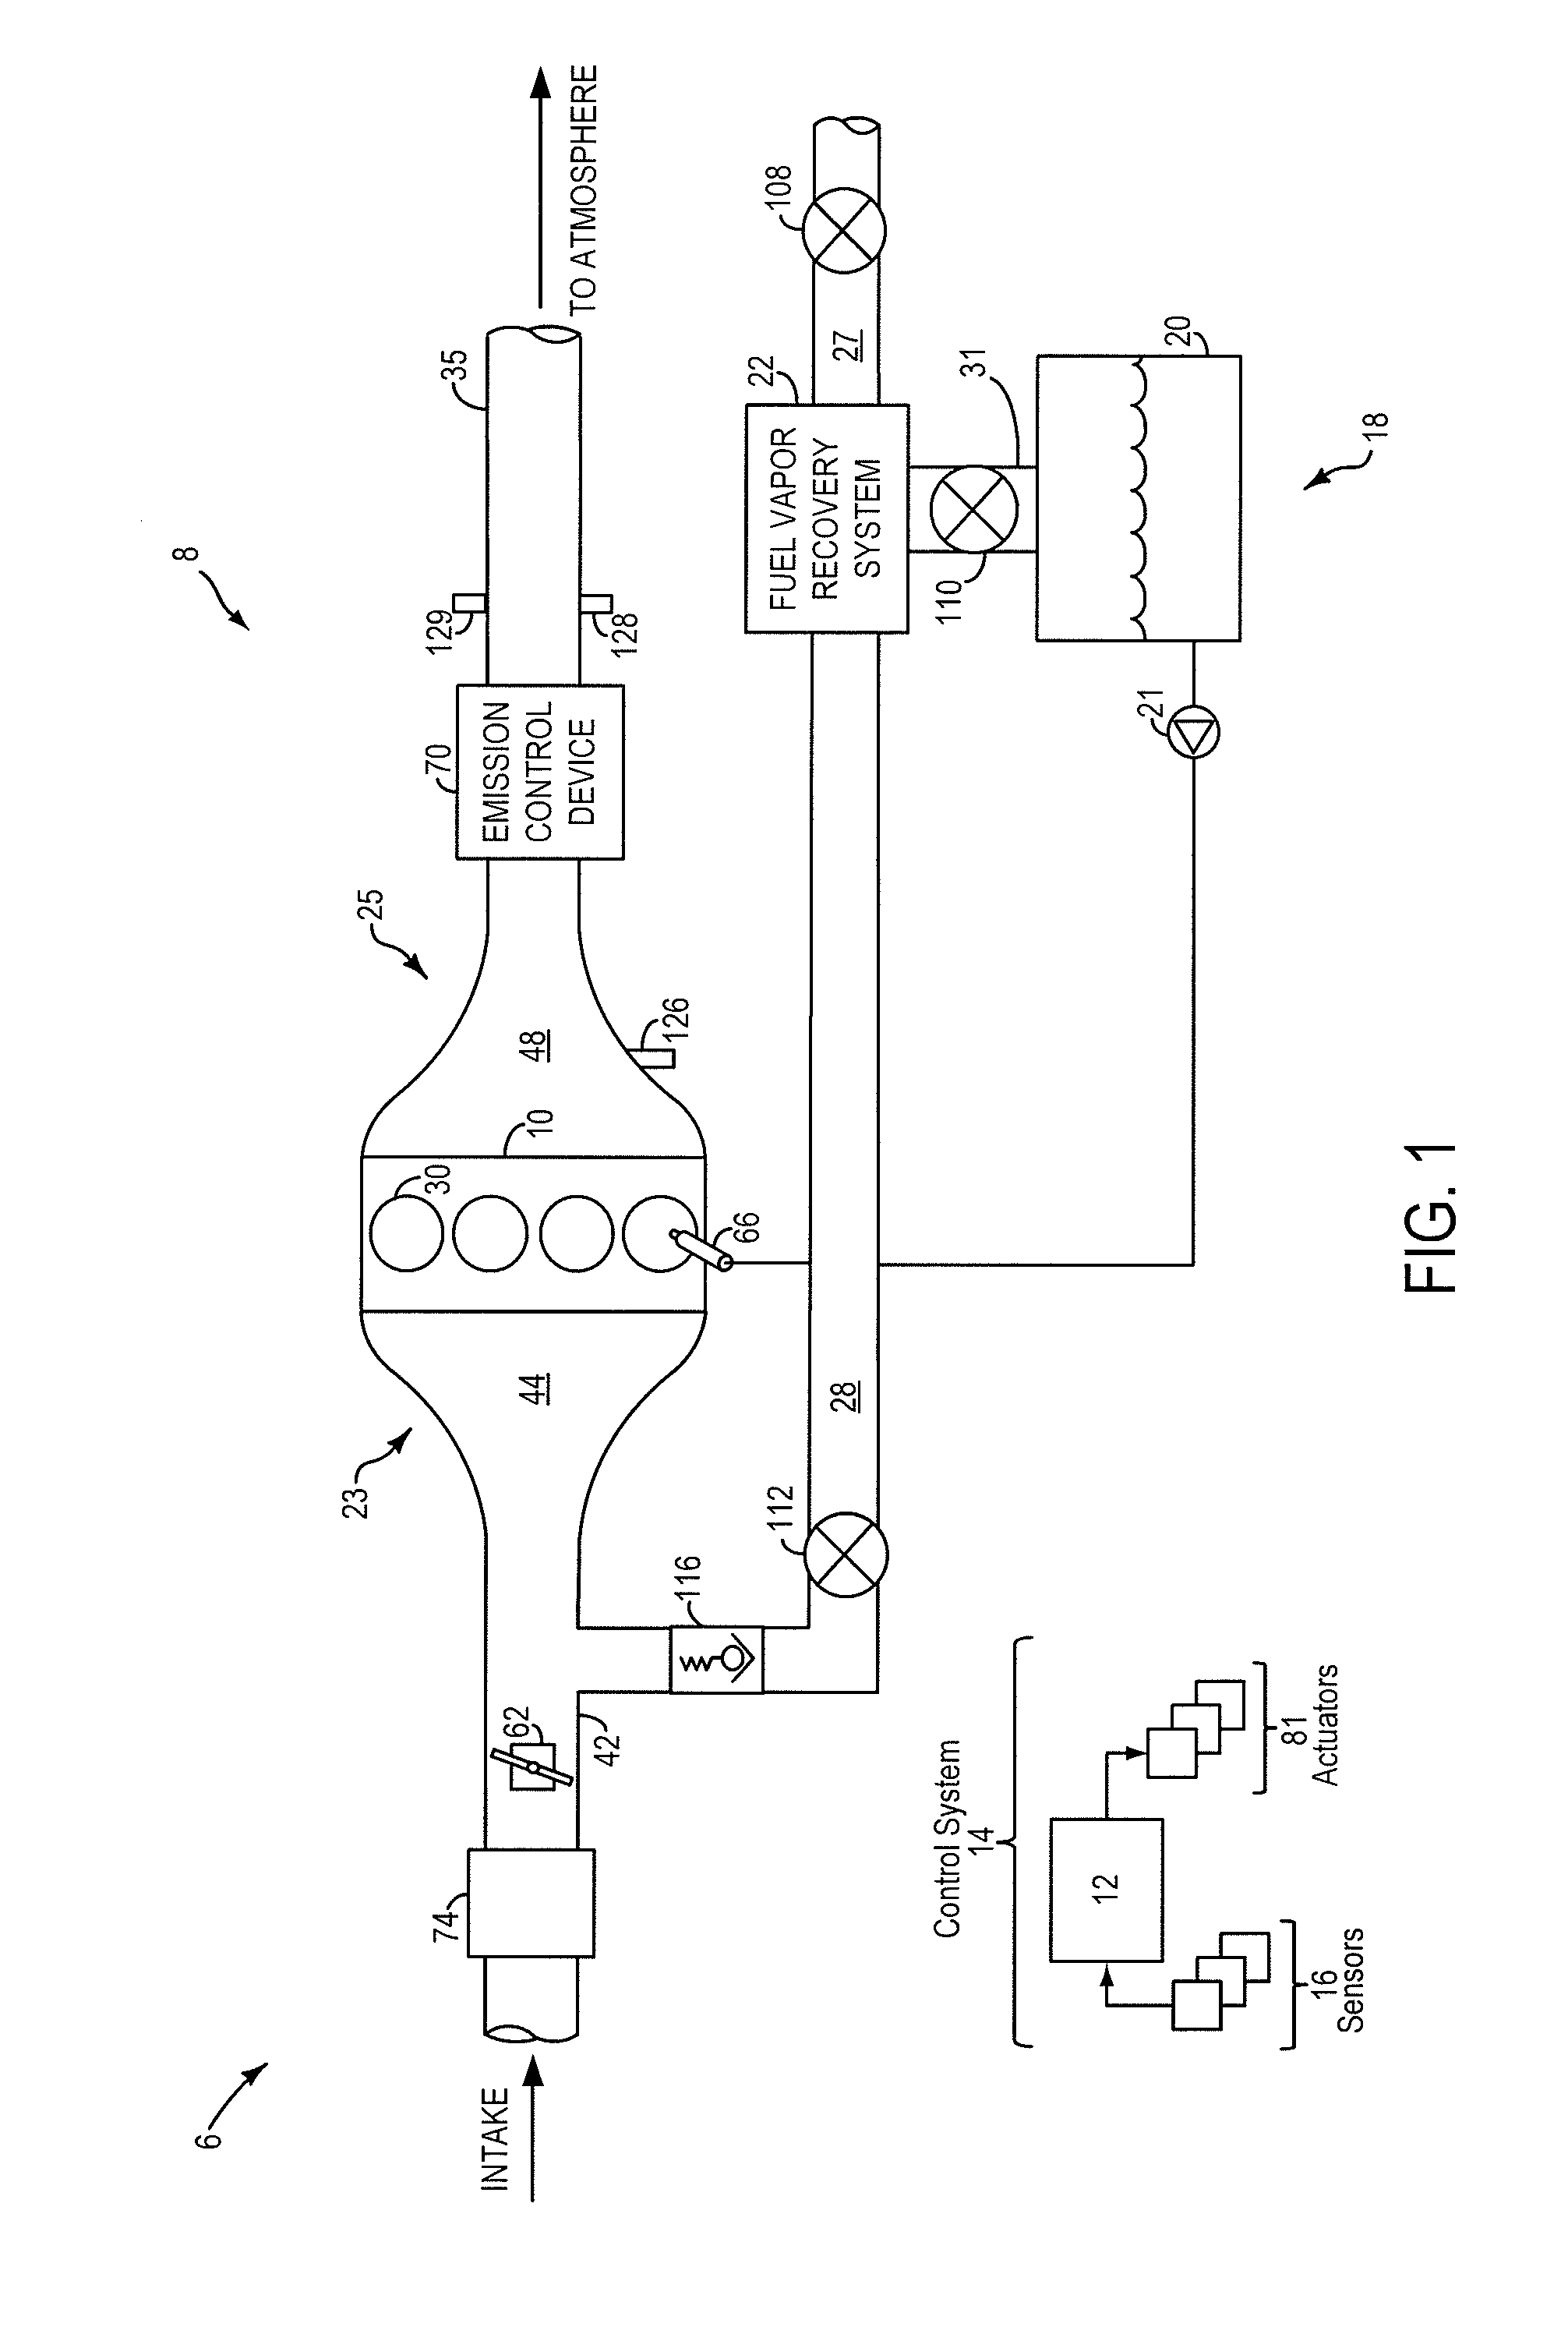 Method and System for Fuel Vapor Control